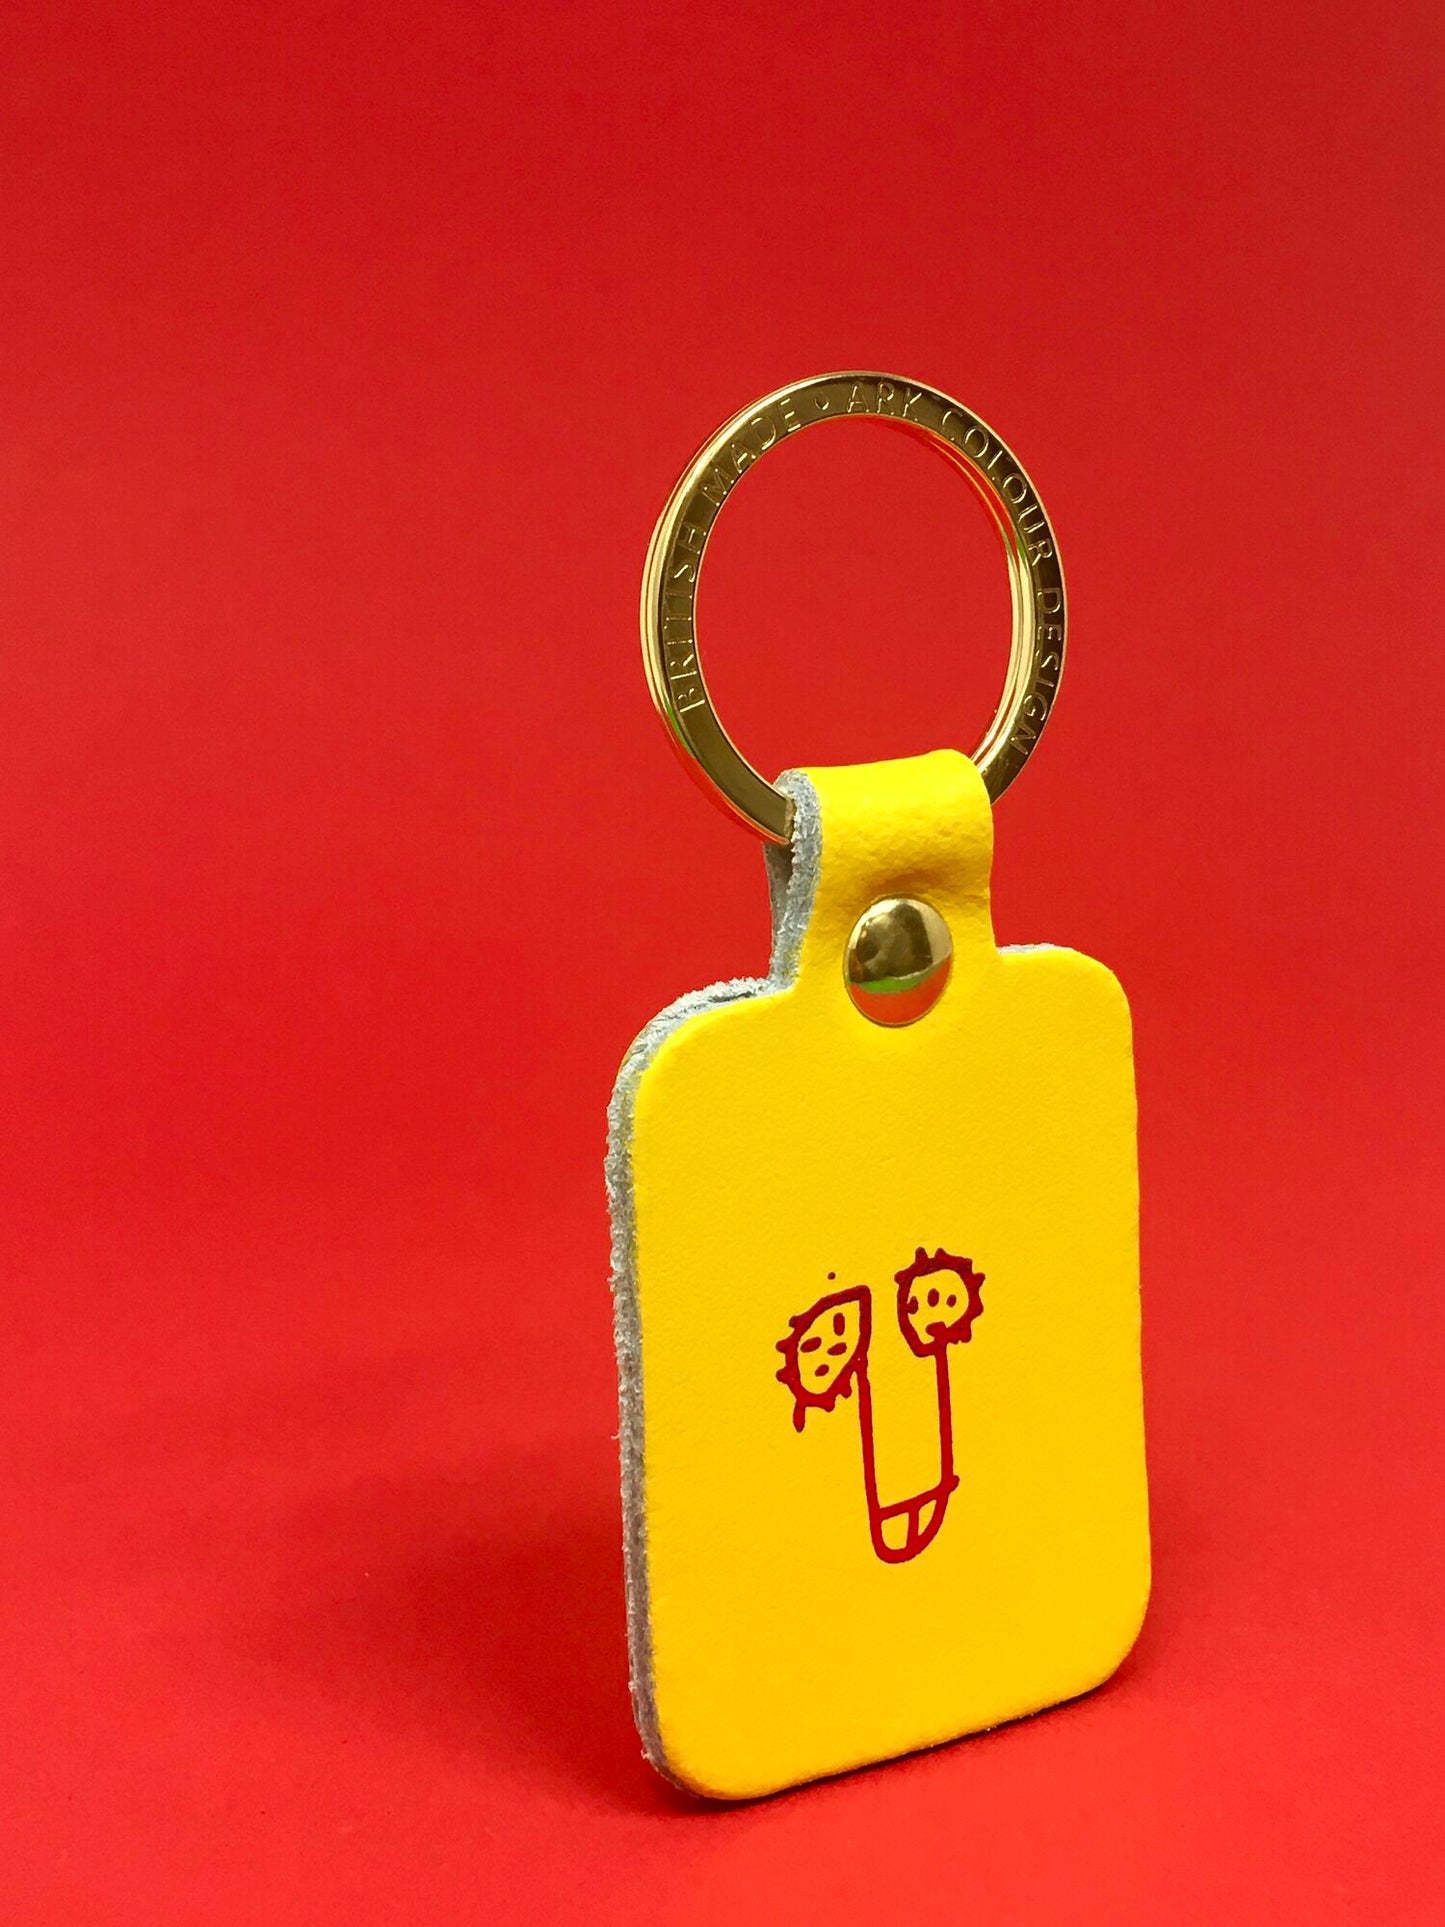 Willy Key Fob Bright Yellow